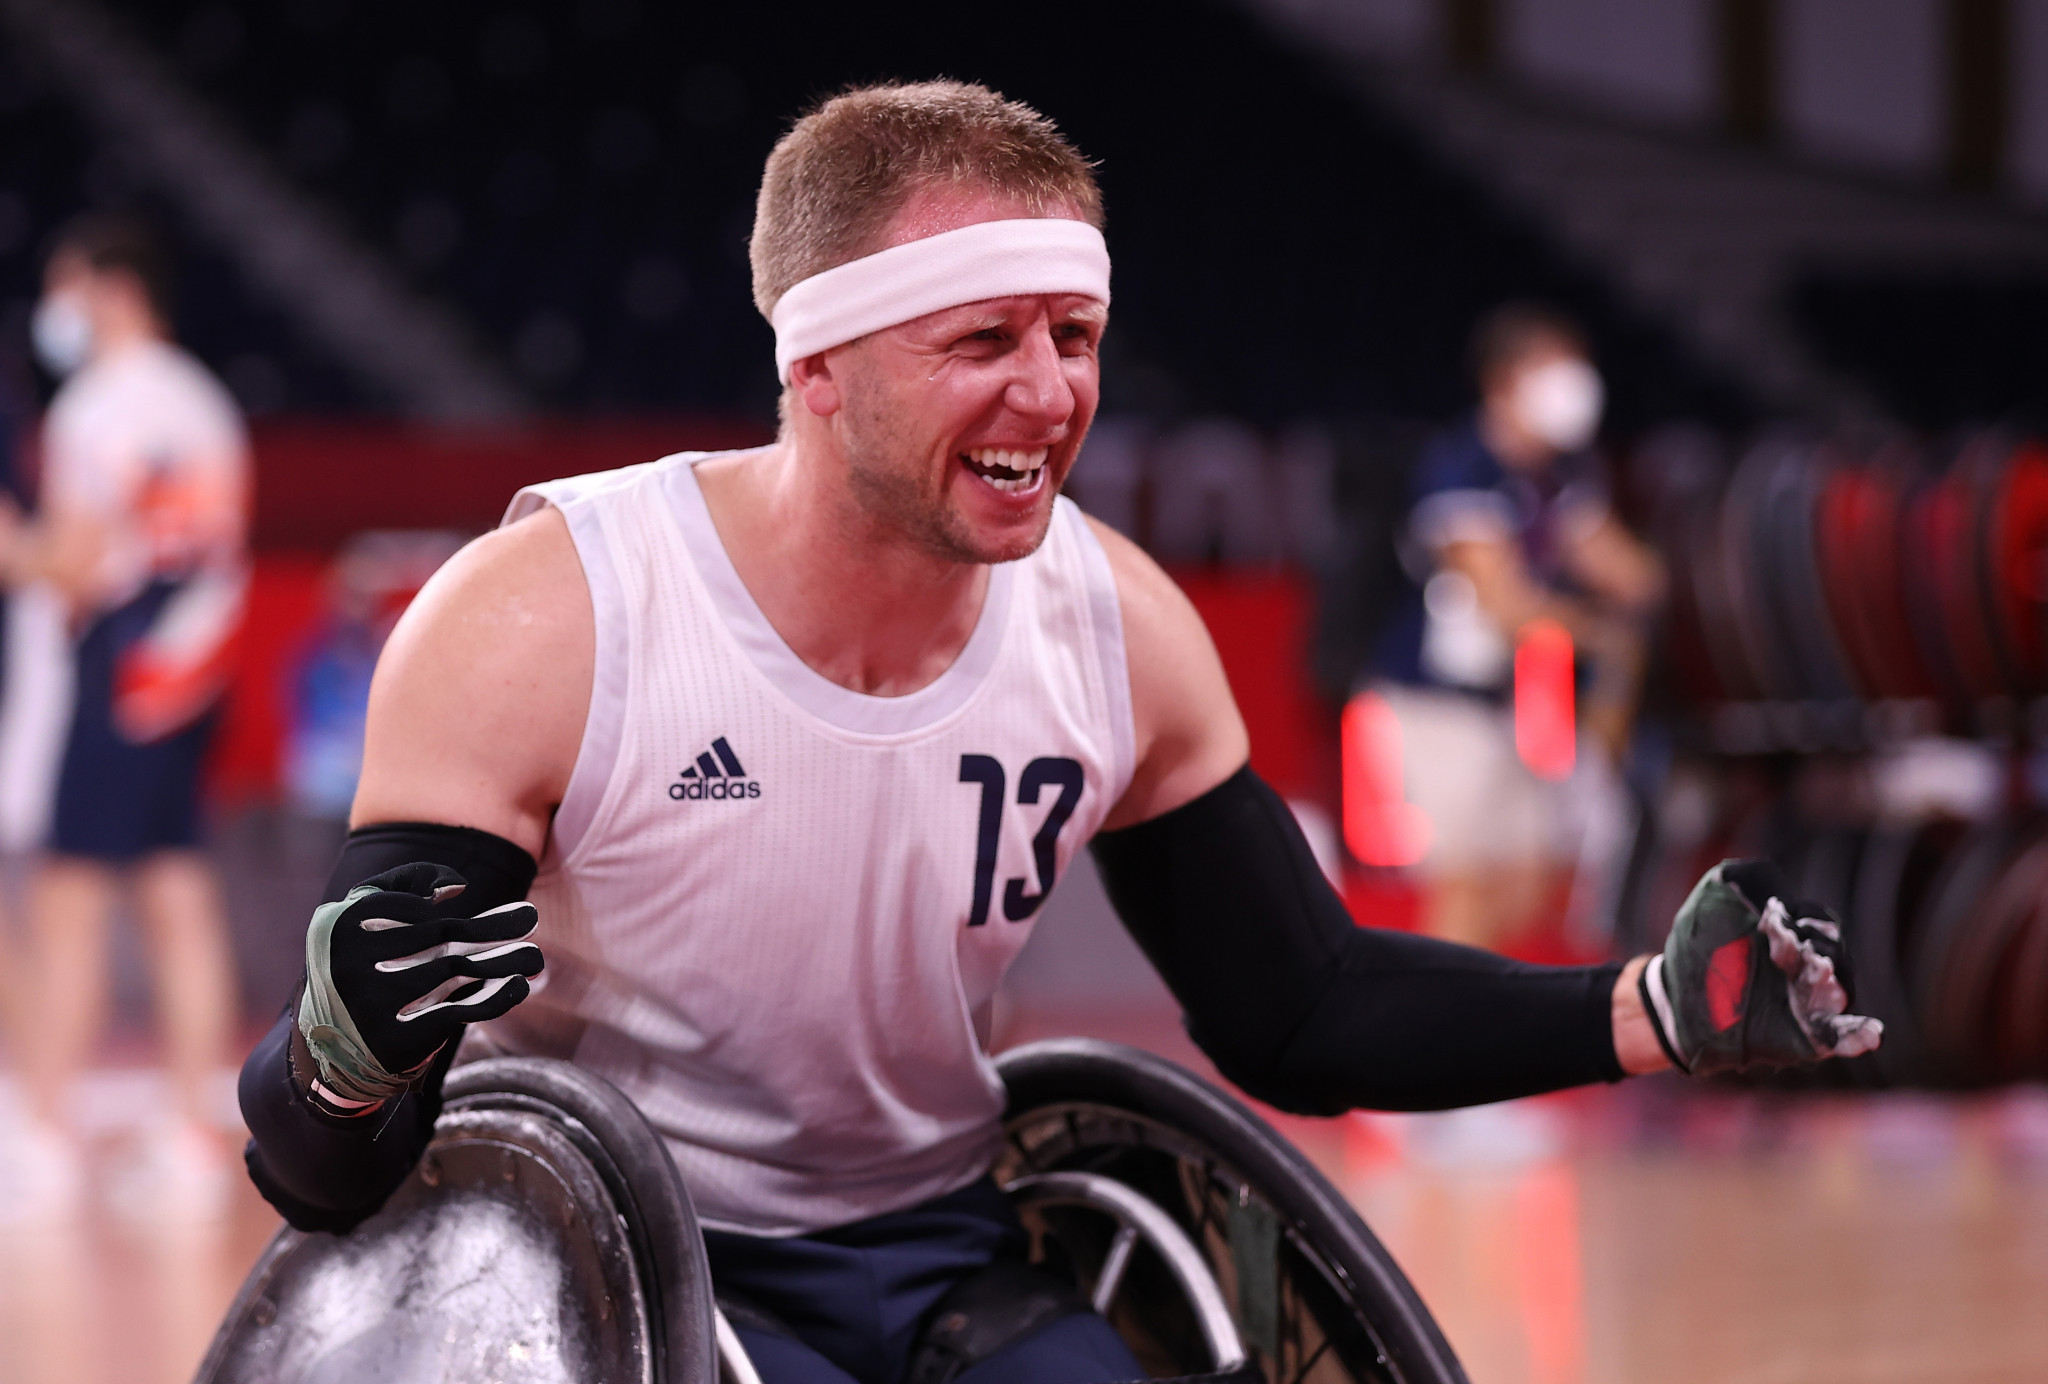 Britain will meet France in the Wheelchair Rugby European Championship Division A final ©Getty Images